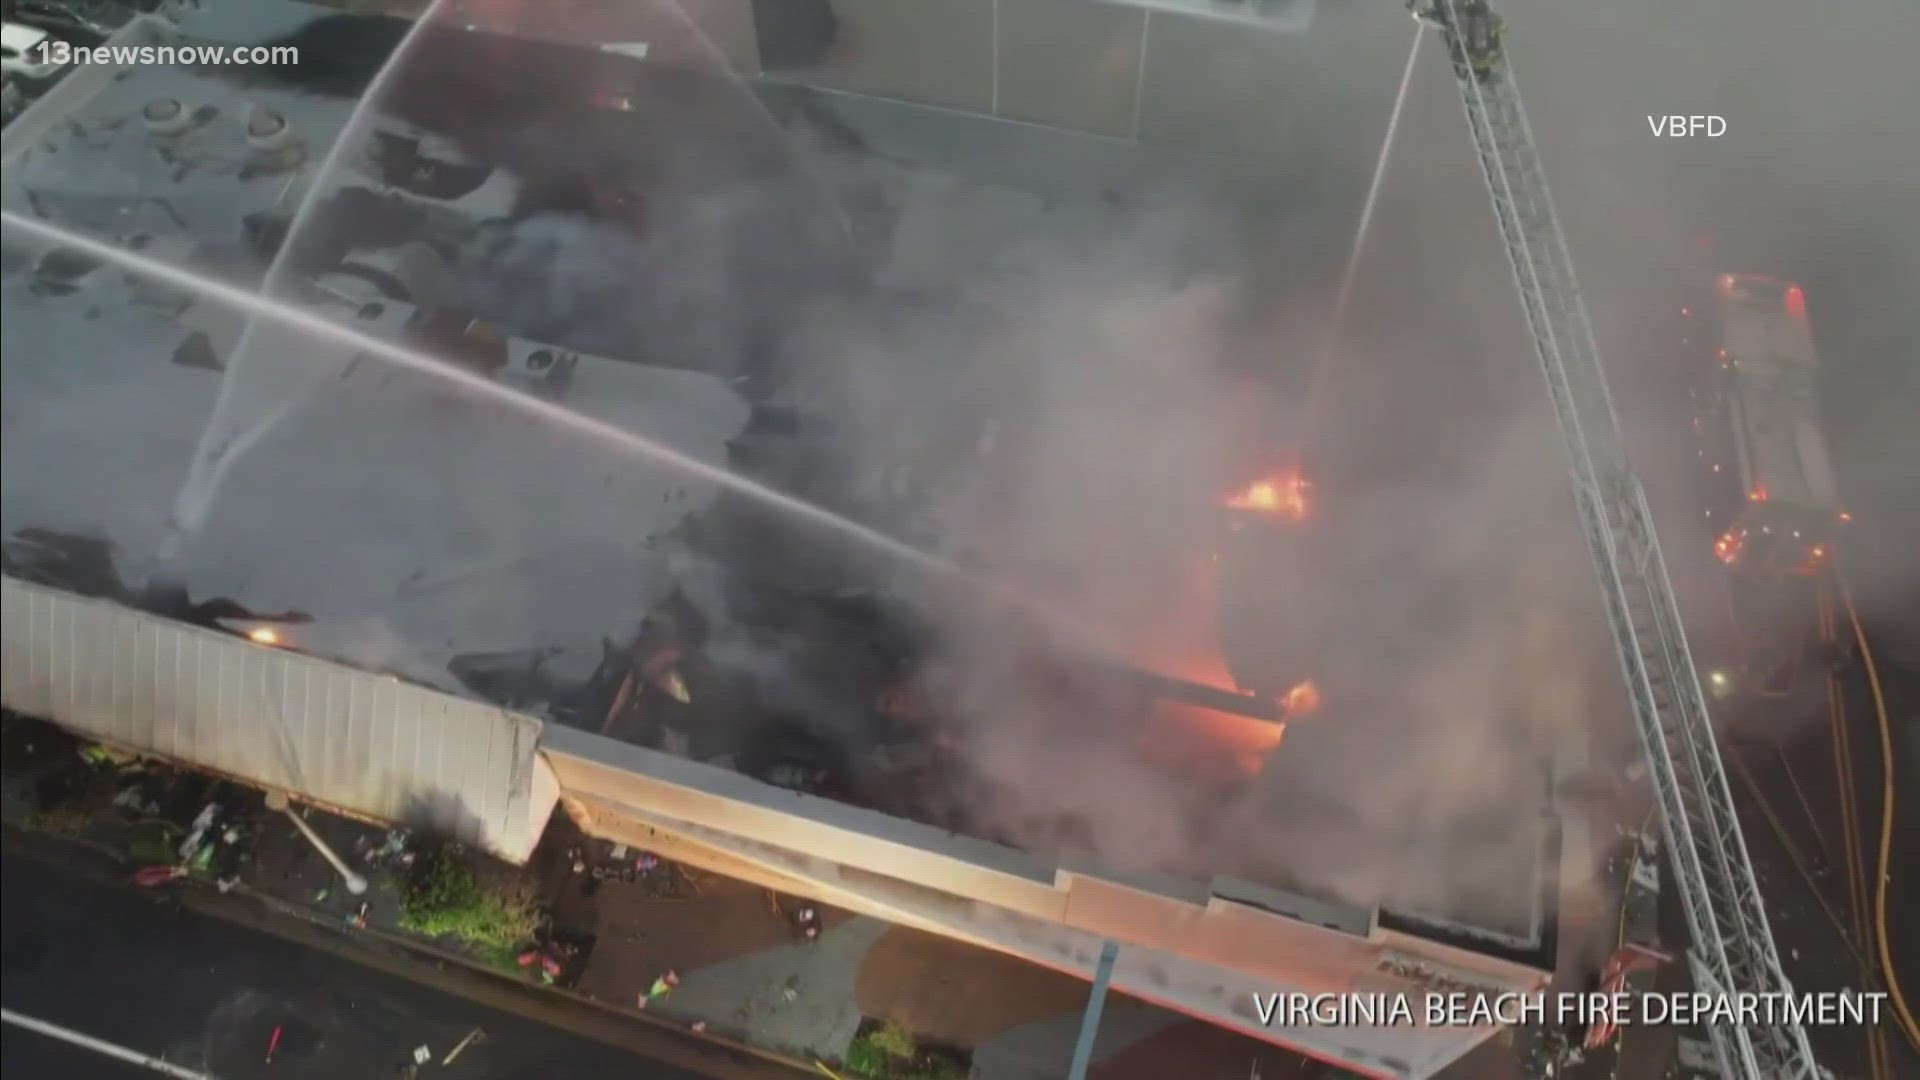 The fire that burned down three Virginia Beach businesses at the Oceanfront is ruled accidental.